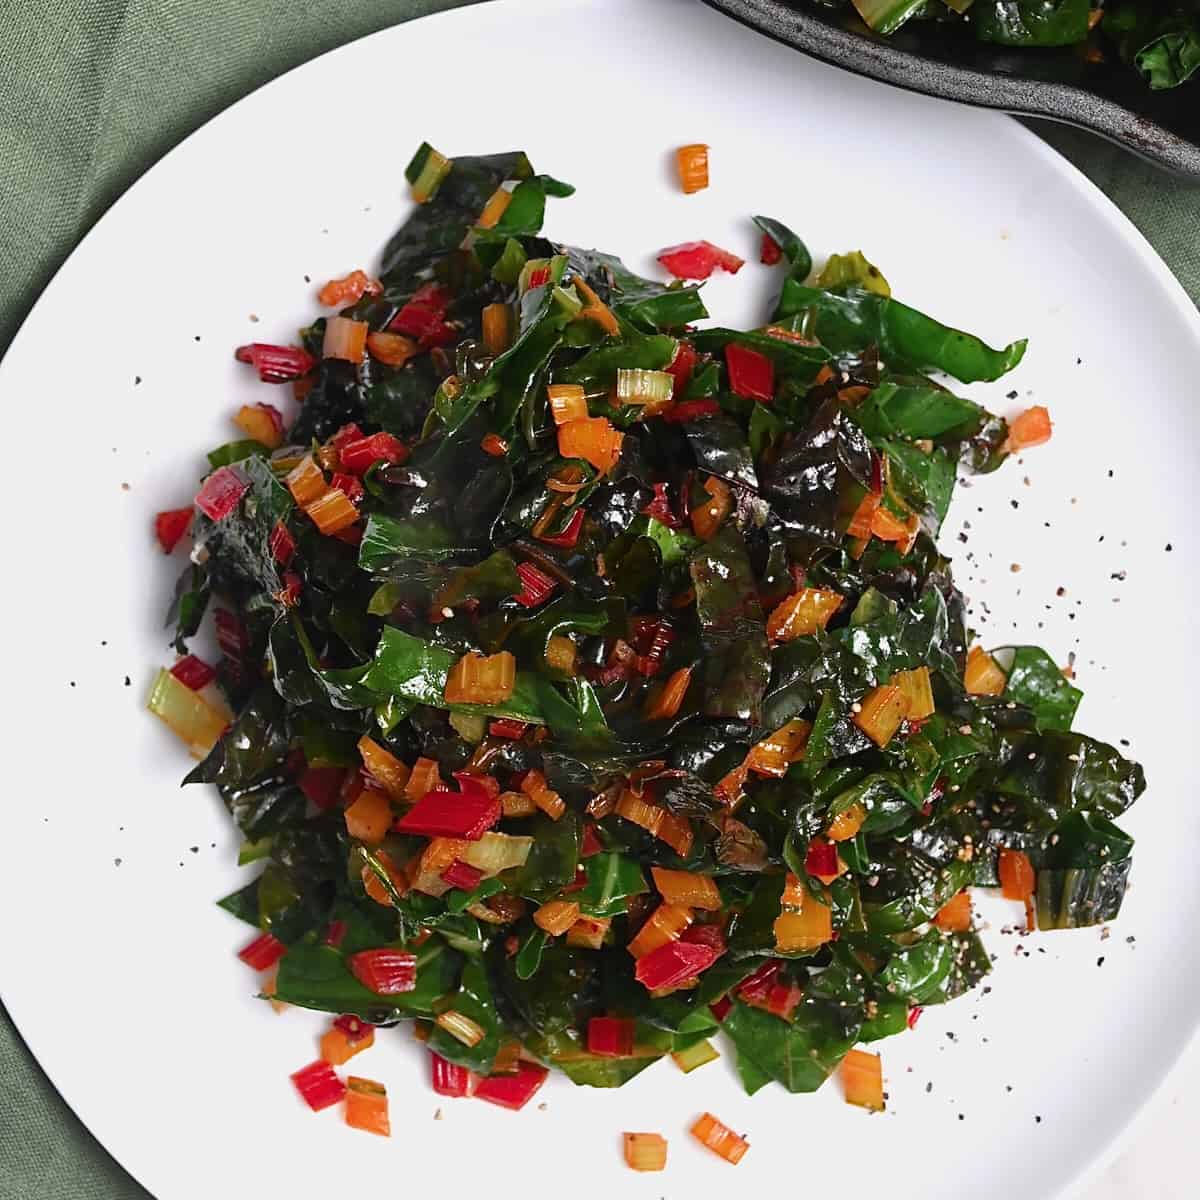 A serving of sautéed chard in a plate